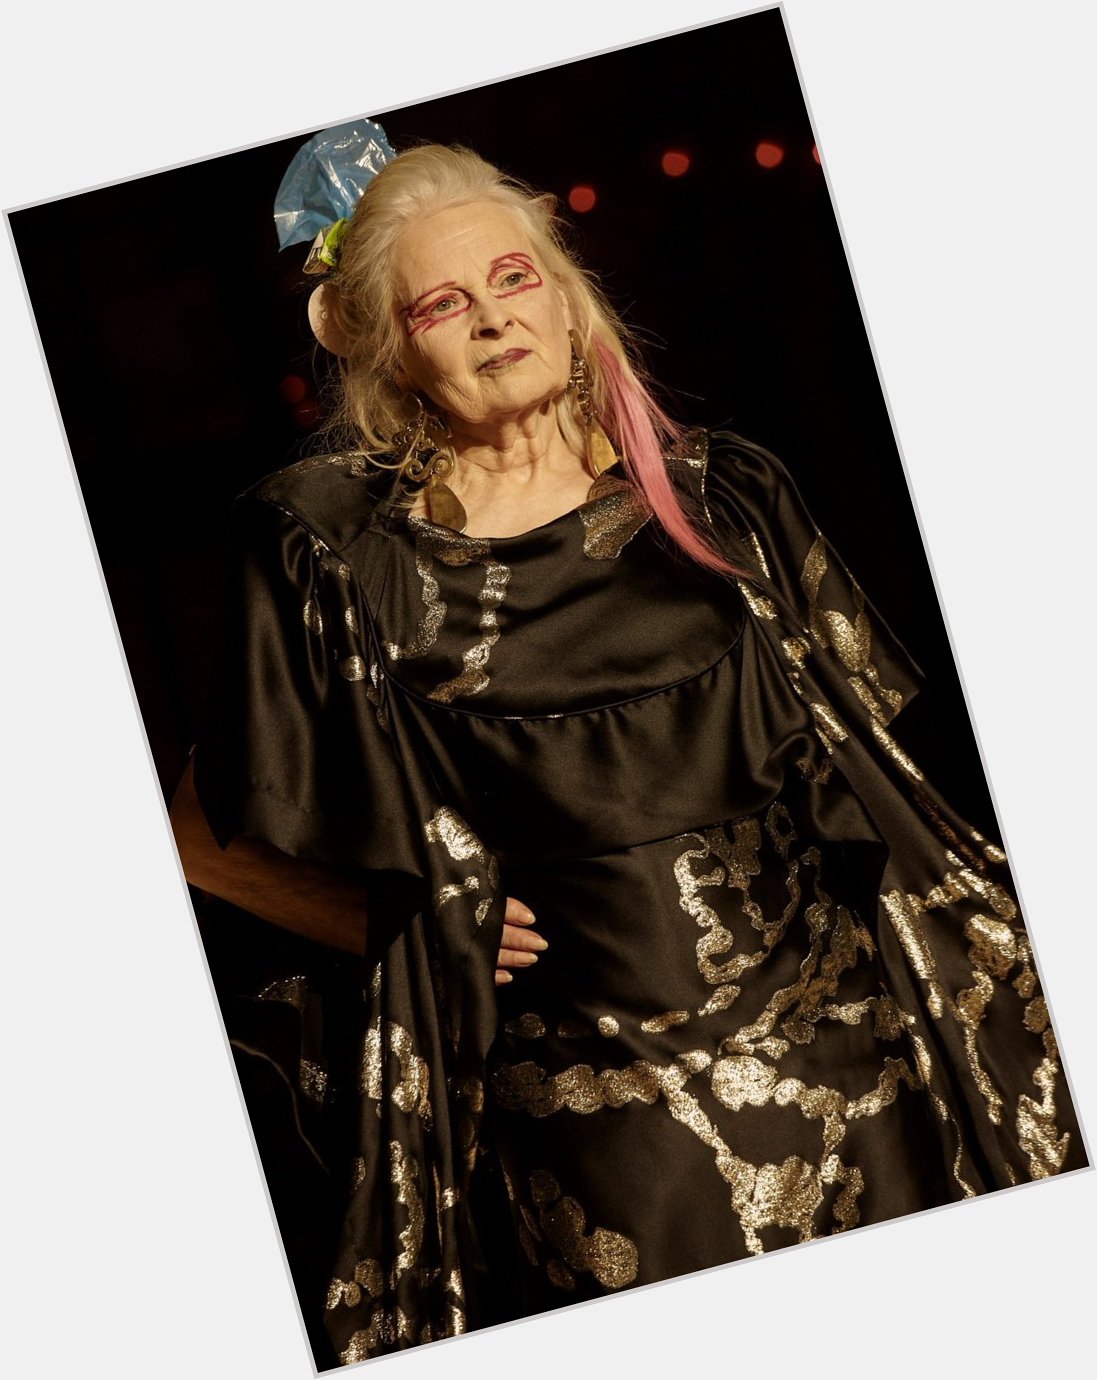 Vivienne westwood walking in her own shows, happy birthday to this icon 